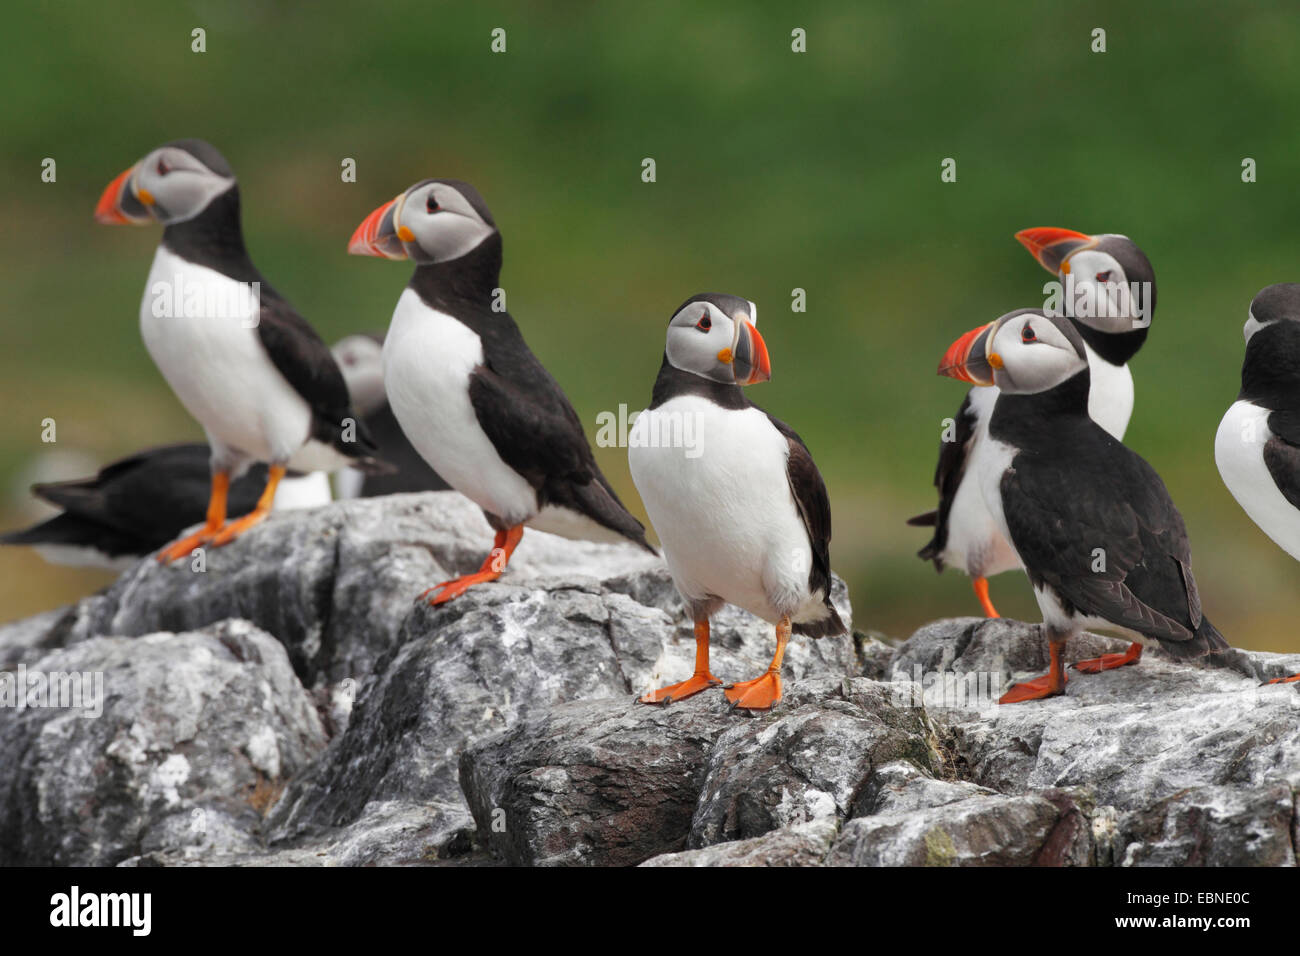 Atlantic puffin, Common puffin (Fratercula arctica), adult birds sitting together on a rock, United Kingdom, England, Farne Islands, Staple Island Stock Photo